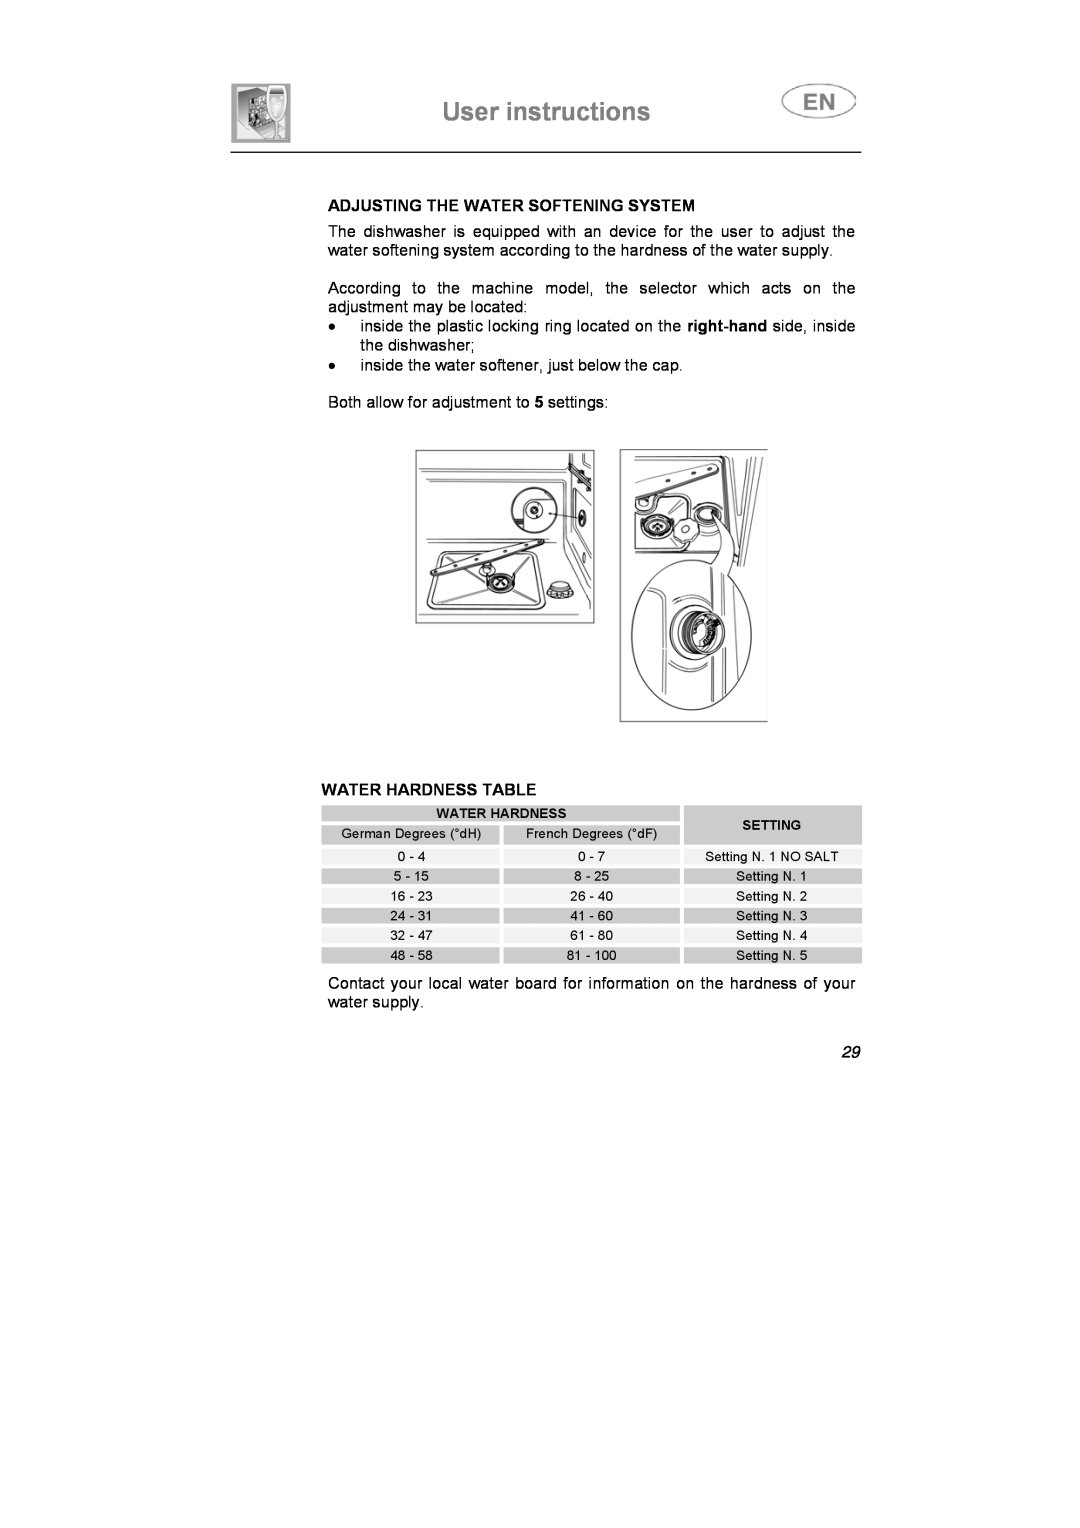 Smeg LSA6047X instruction manual Adjusting The Water Softening System, Water Hardness Table, User instructions 